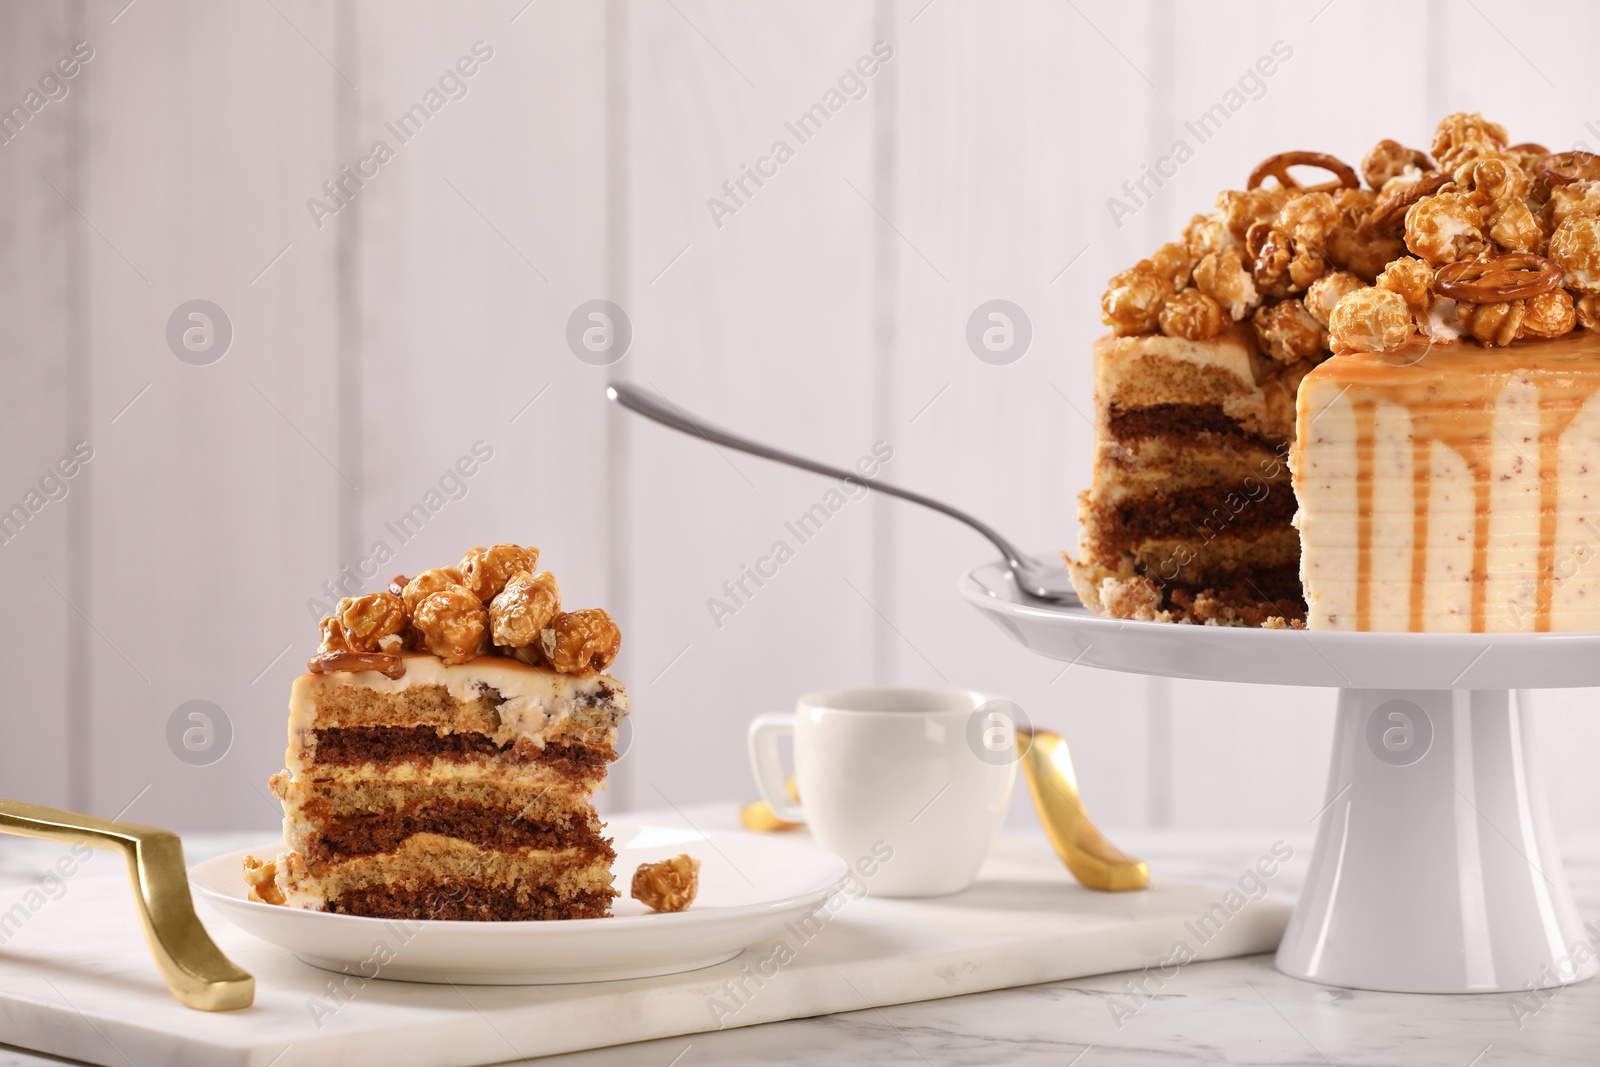 Photo of Caramel drip cake decorated with popcorn and pretzels served on white marble table